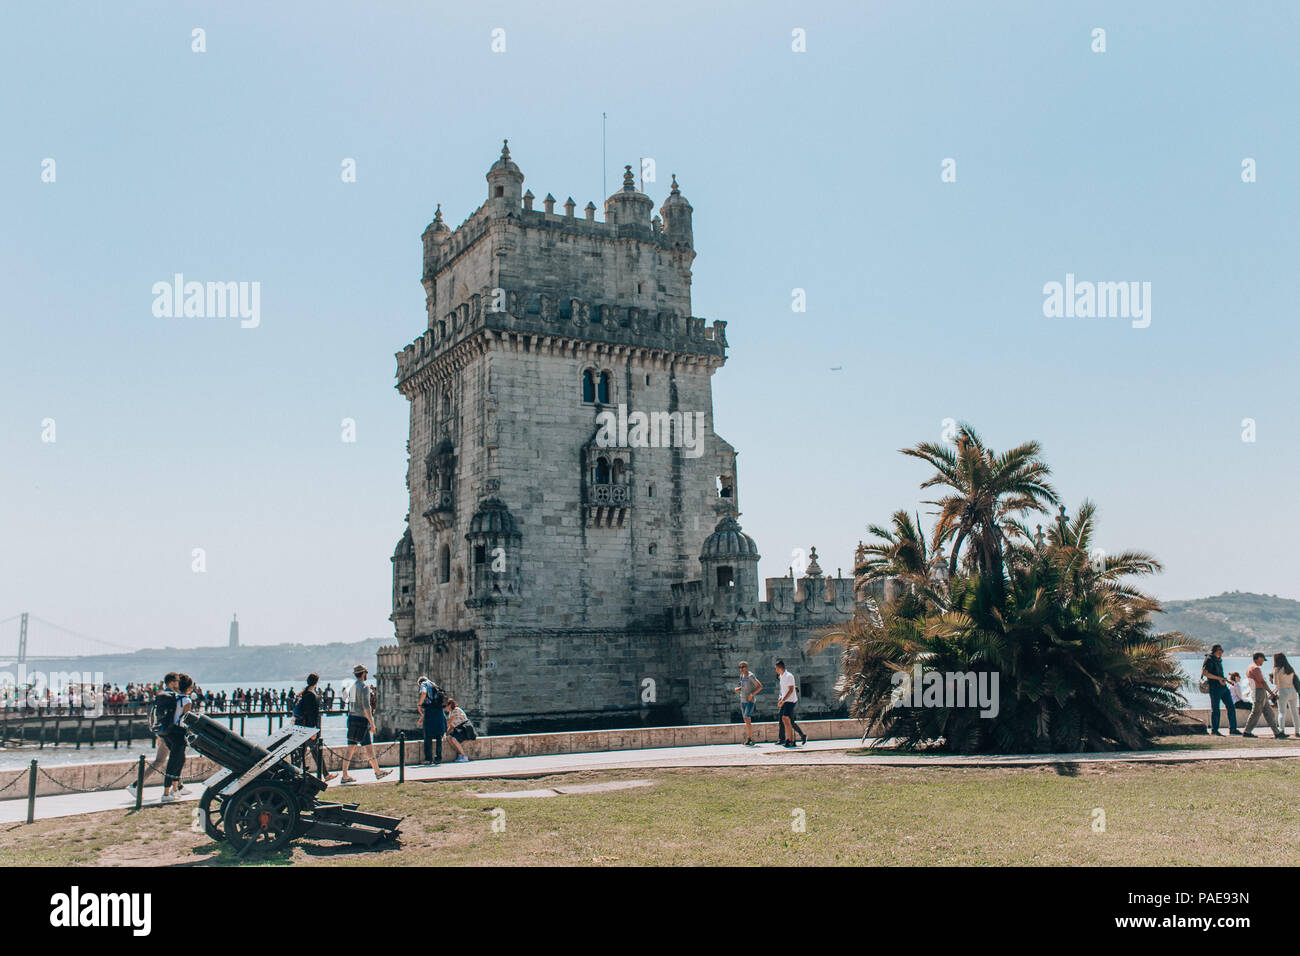 tourists visiting the belem tower in lisbon Stock Photo